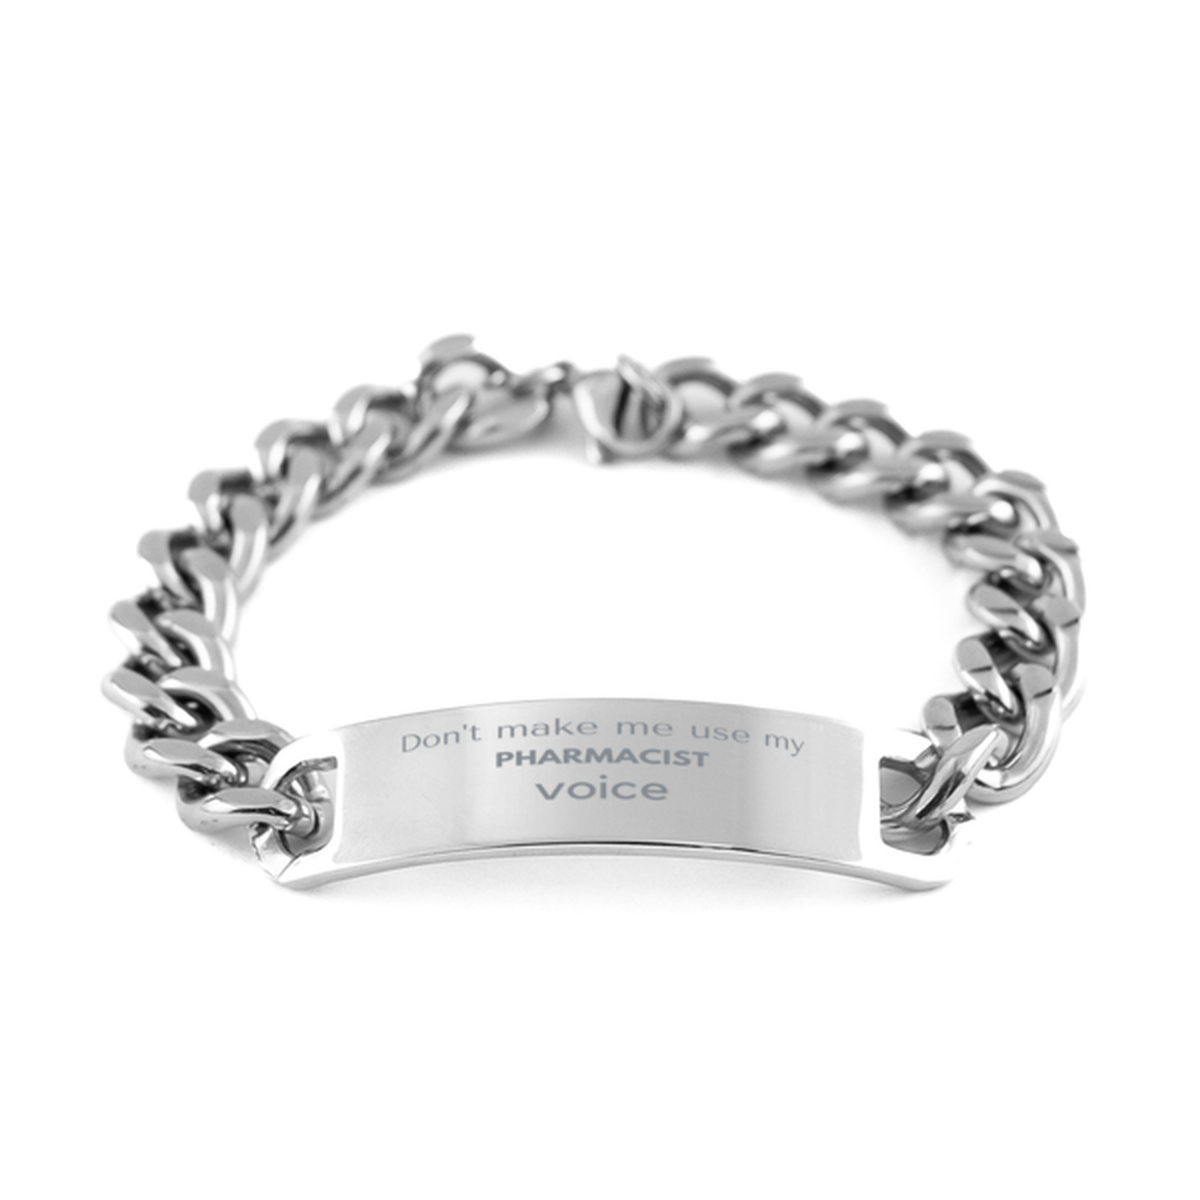 Don't make me use my Pharmacist voice, Sarcasm Pharmacist Gifts, Christmas Pharmacist Cuban Chain Stainless Steel Bracelet Birthday Unique Gifts For Pharmacist Coworkers, Men, Women, Colleague, Friends